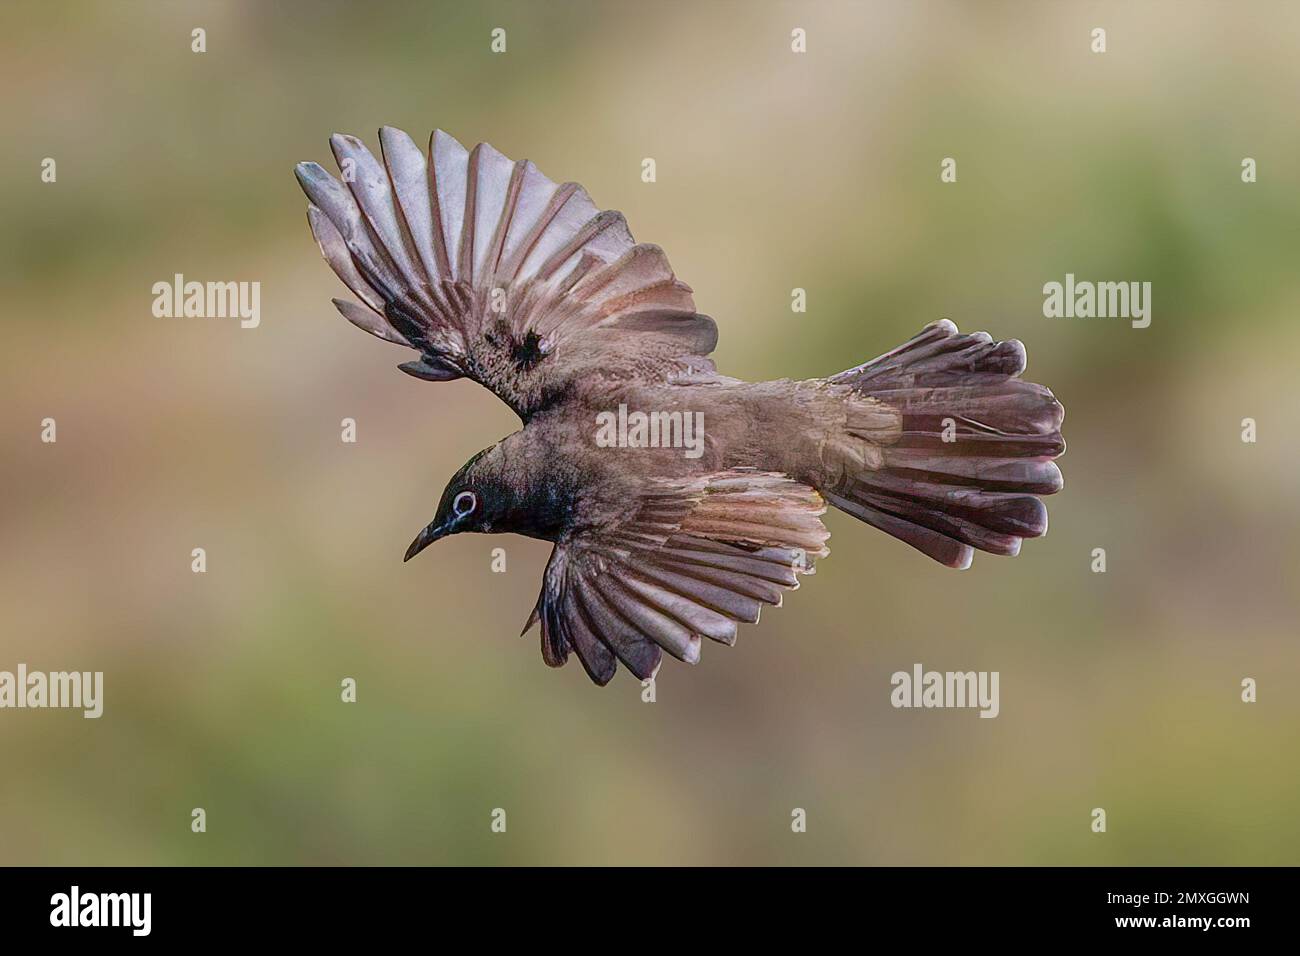 A closeup of a Cape bulbul, Pycnonotus capensis flying in the sky with its wings wide open Stock Photo